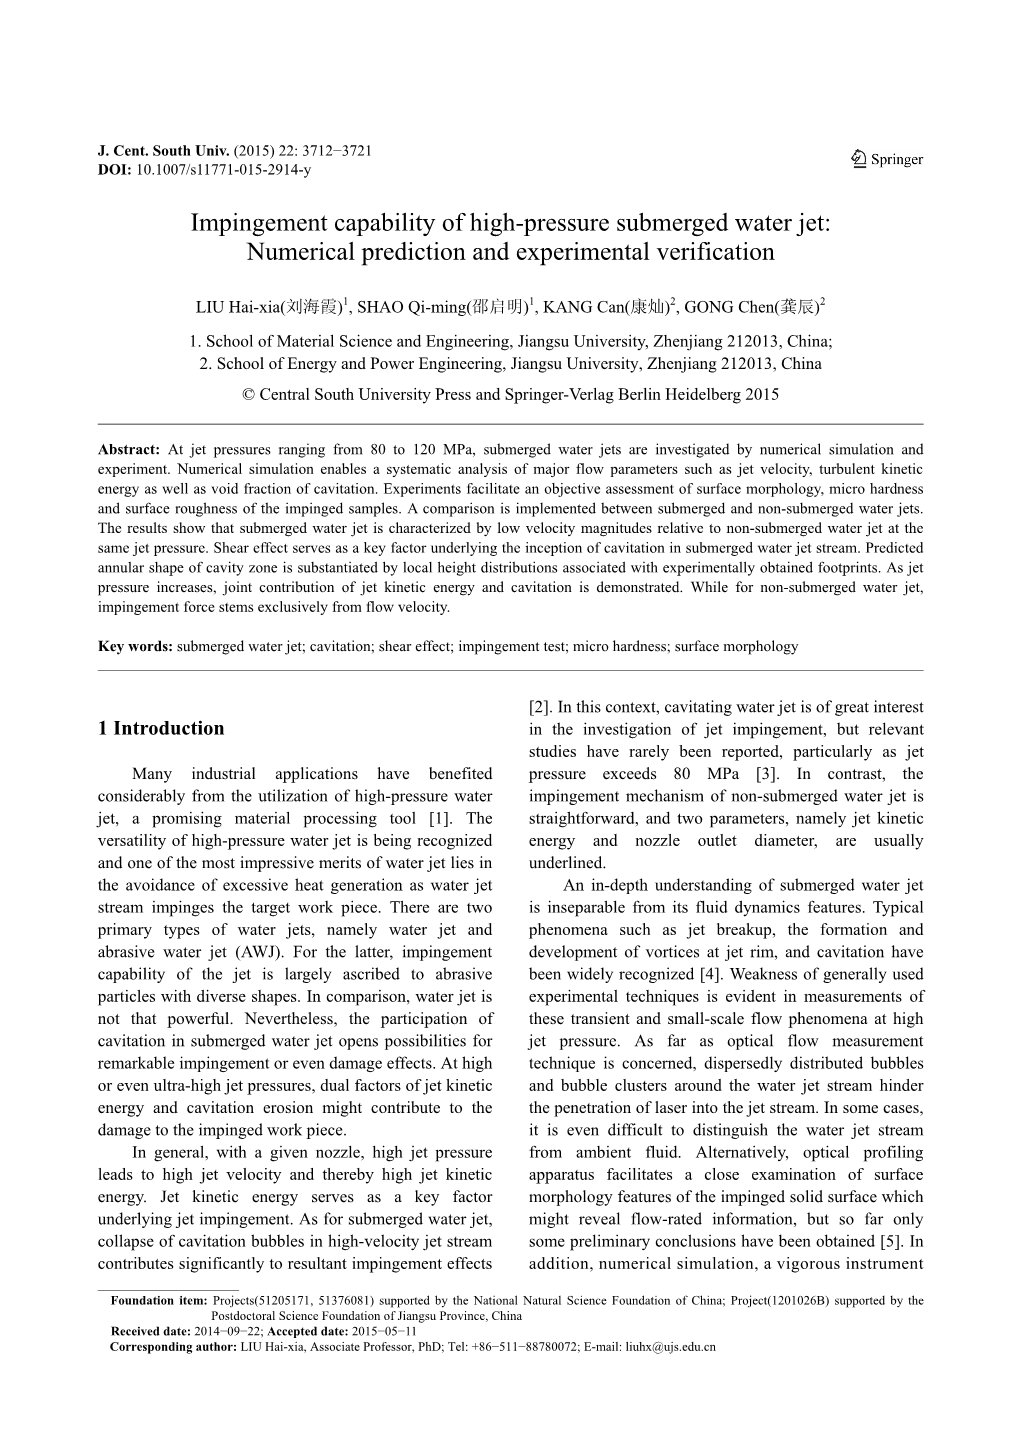 Impingement Capability of High-Pressure Submerged Water Jet: Numerical Prediction and Experimental Verification